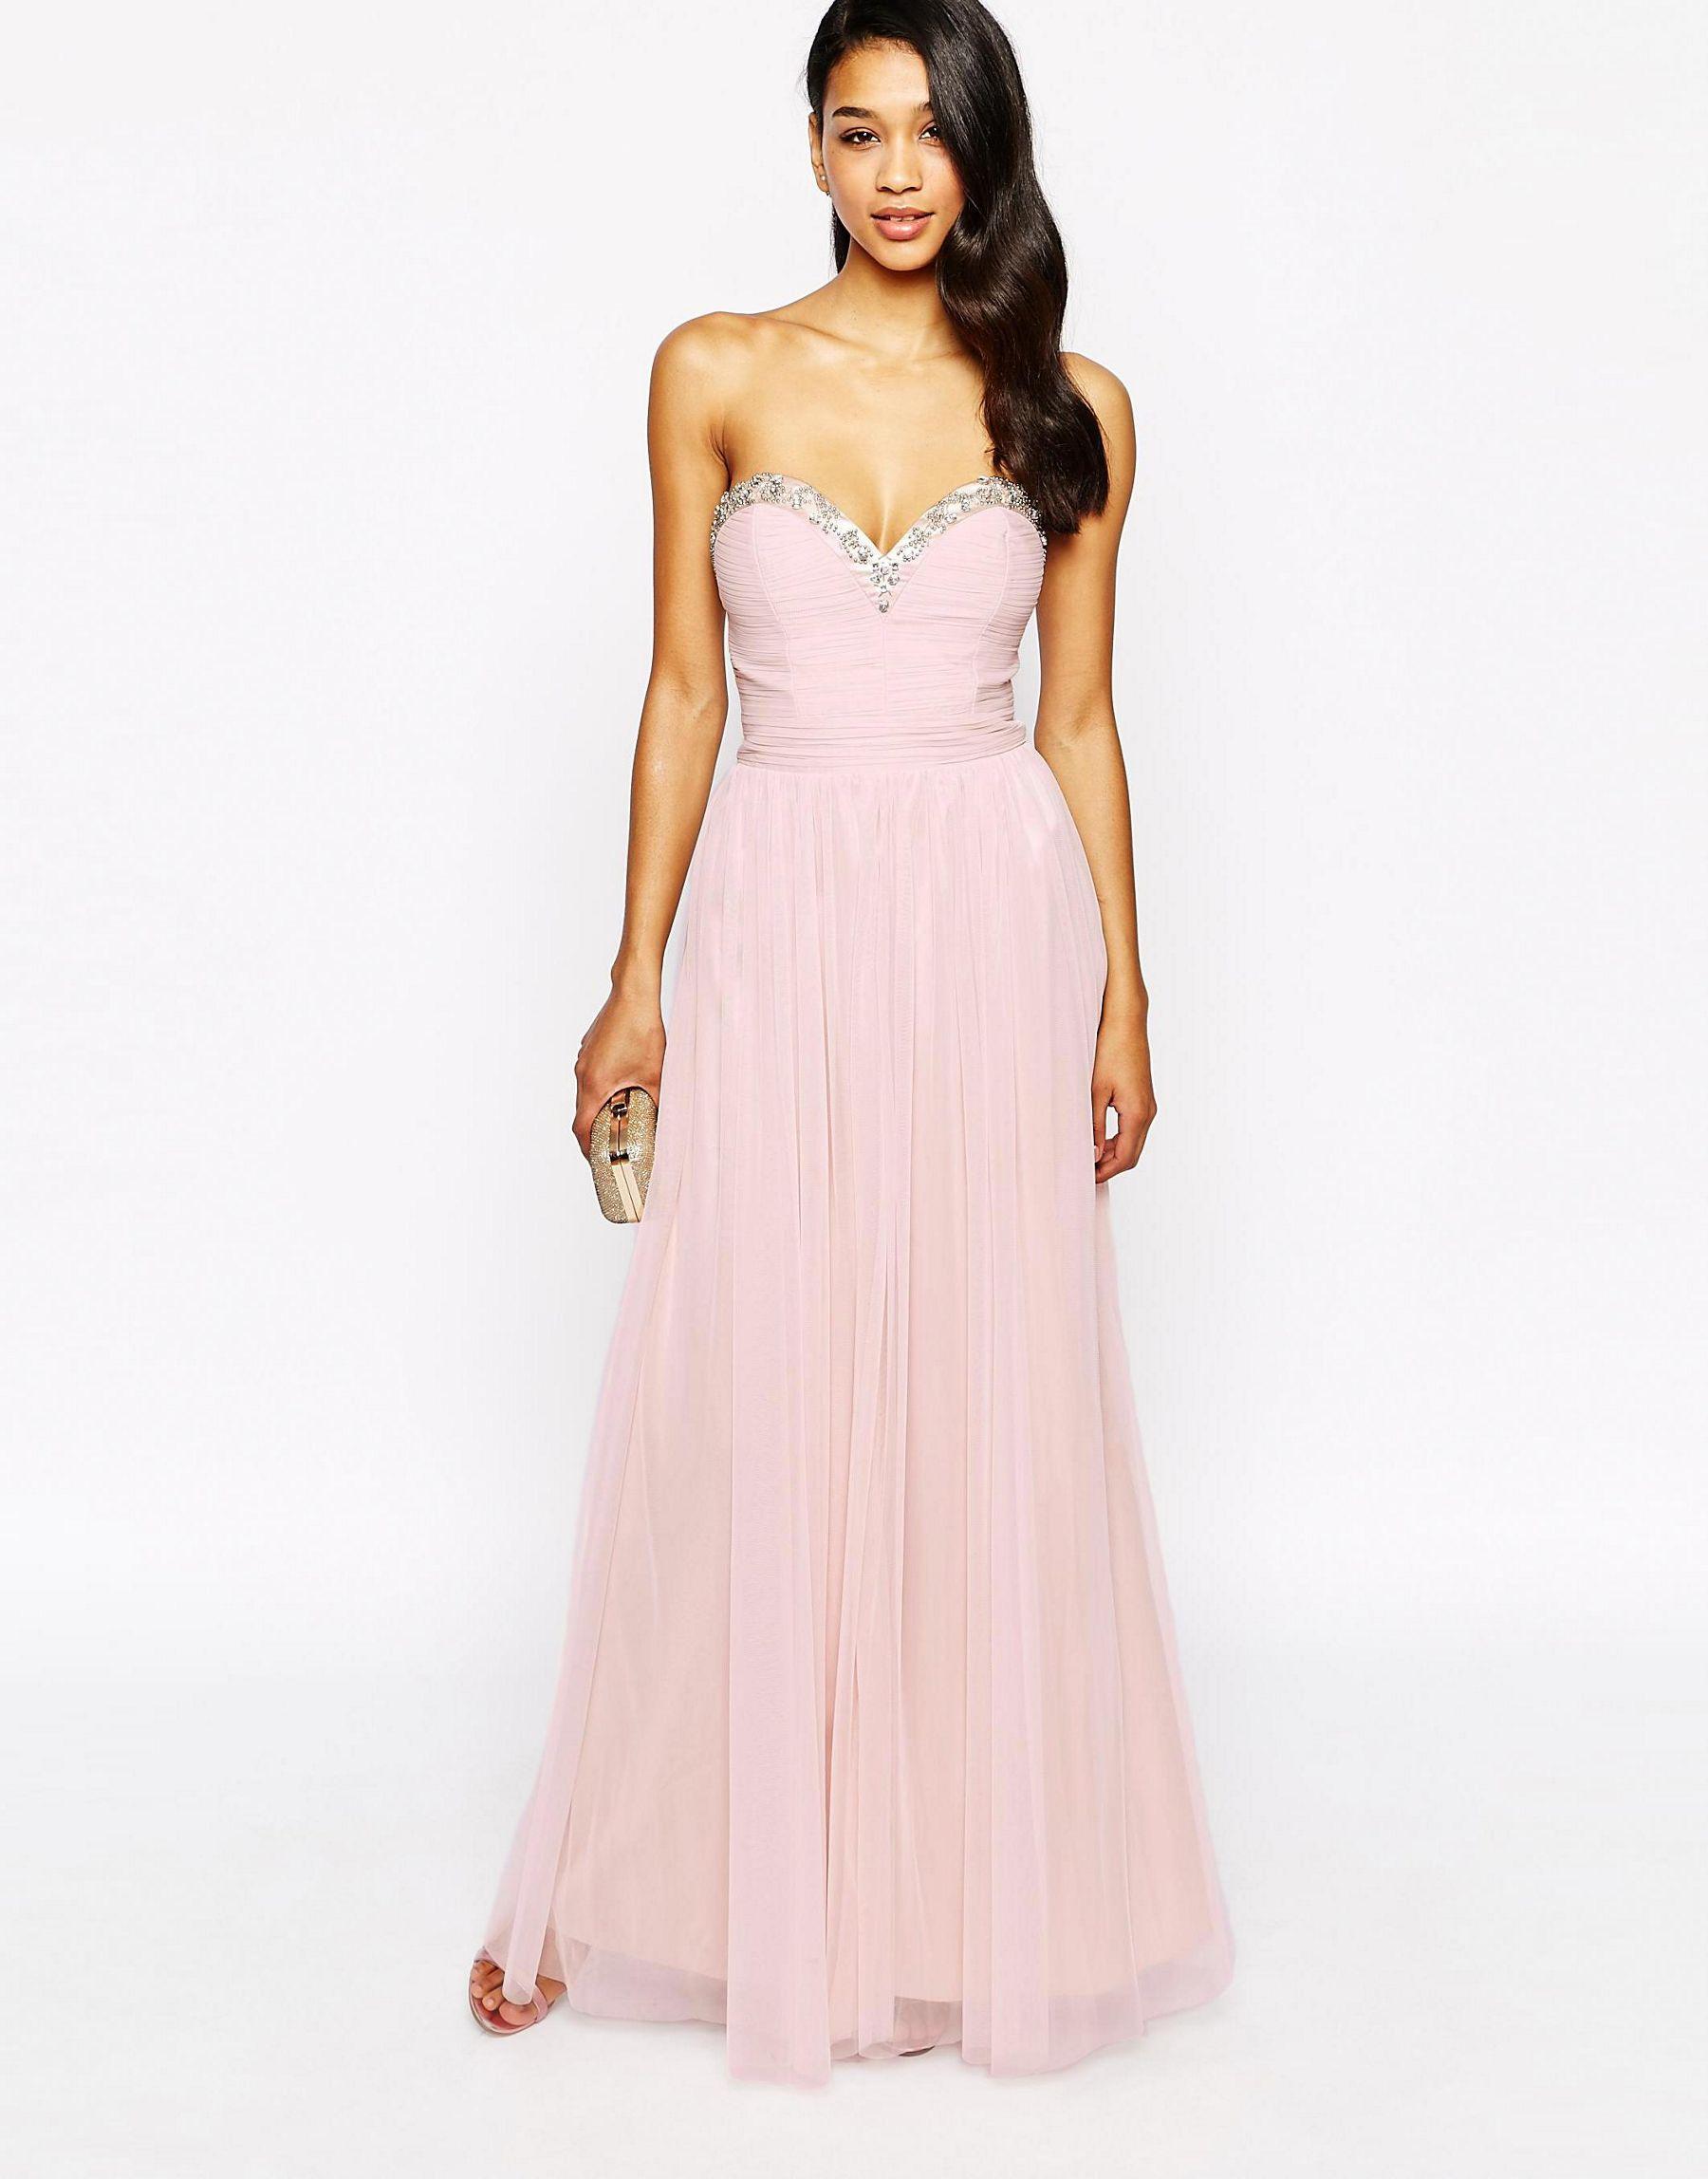 Lyst - Lipsy Embellished Maxi Dress With Tulle Skirt - Nude in Pink